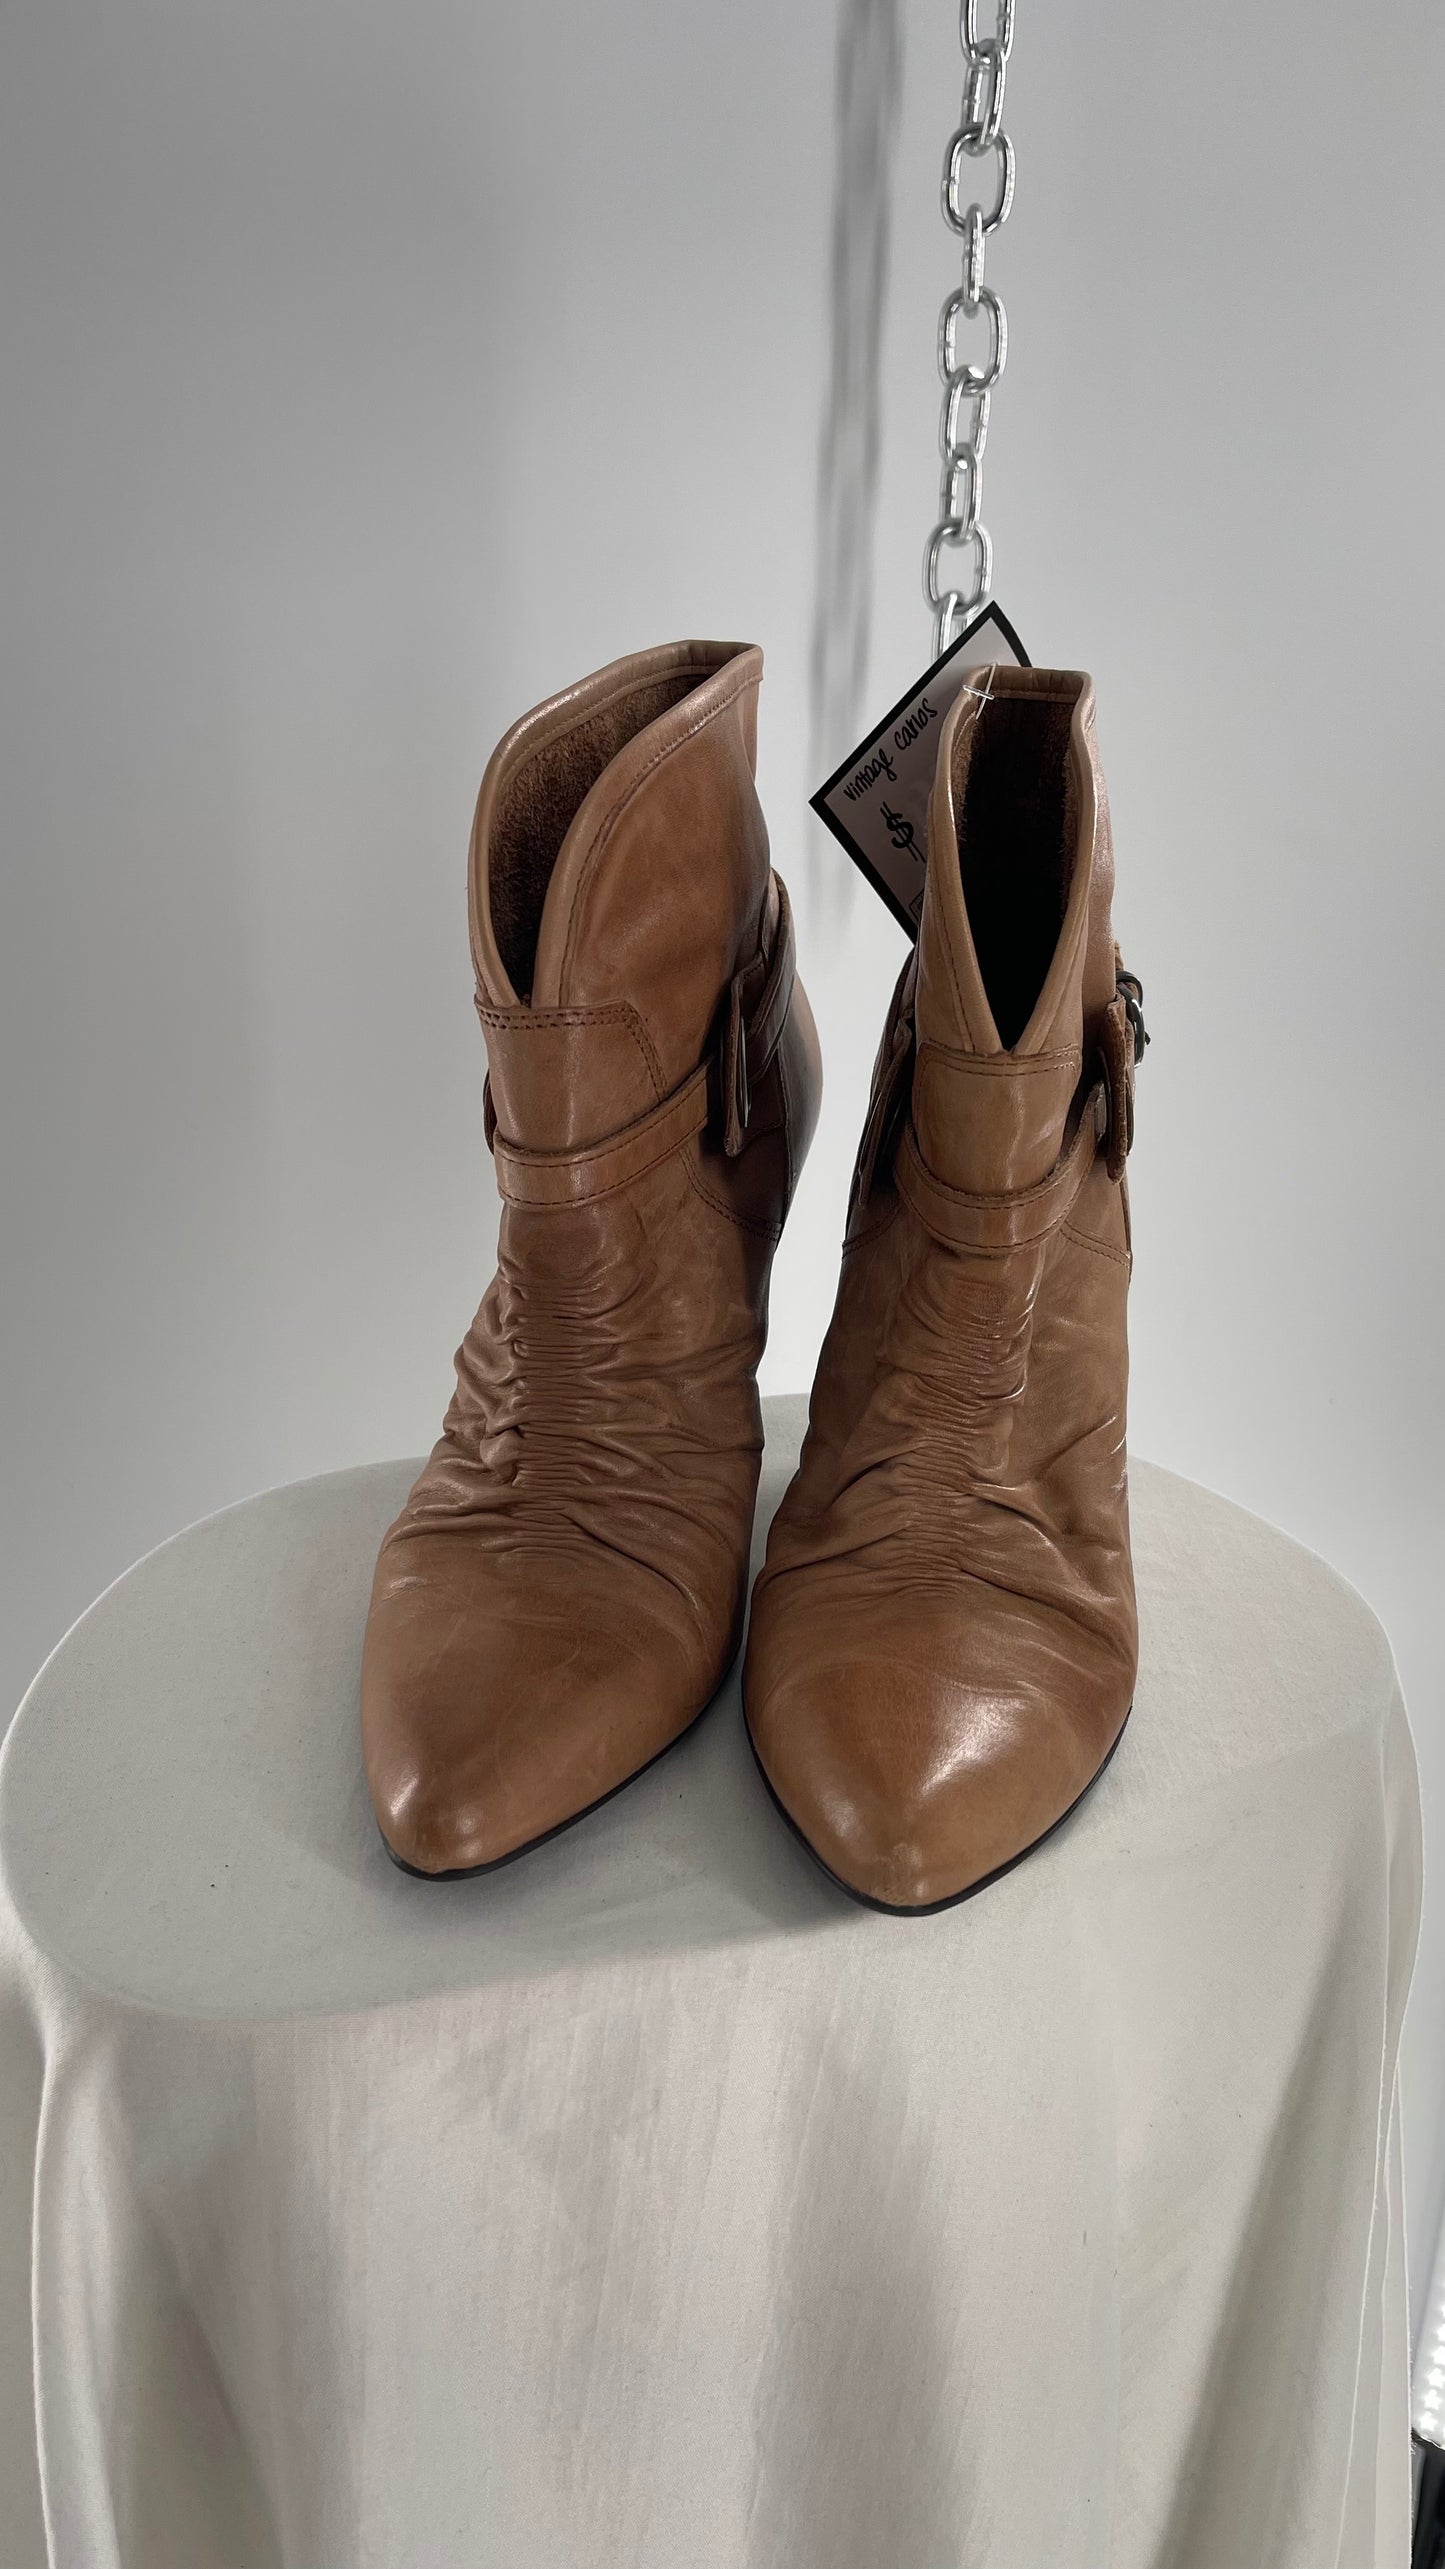 Vintage Pointed Toe Booties with Ruching and Belt Detail Made in Brazil